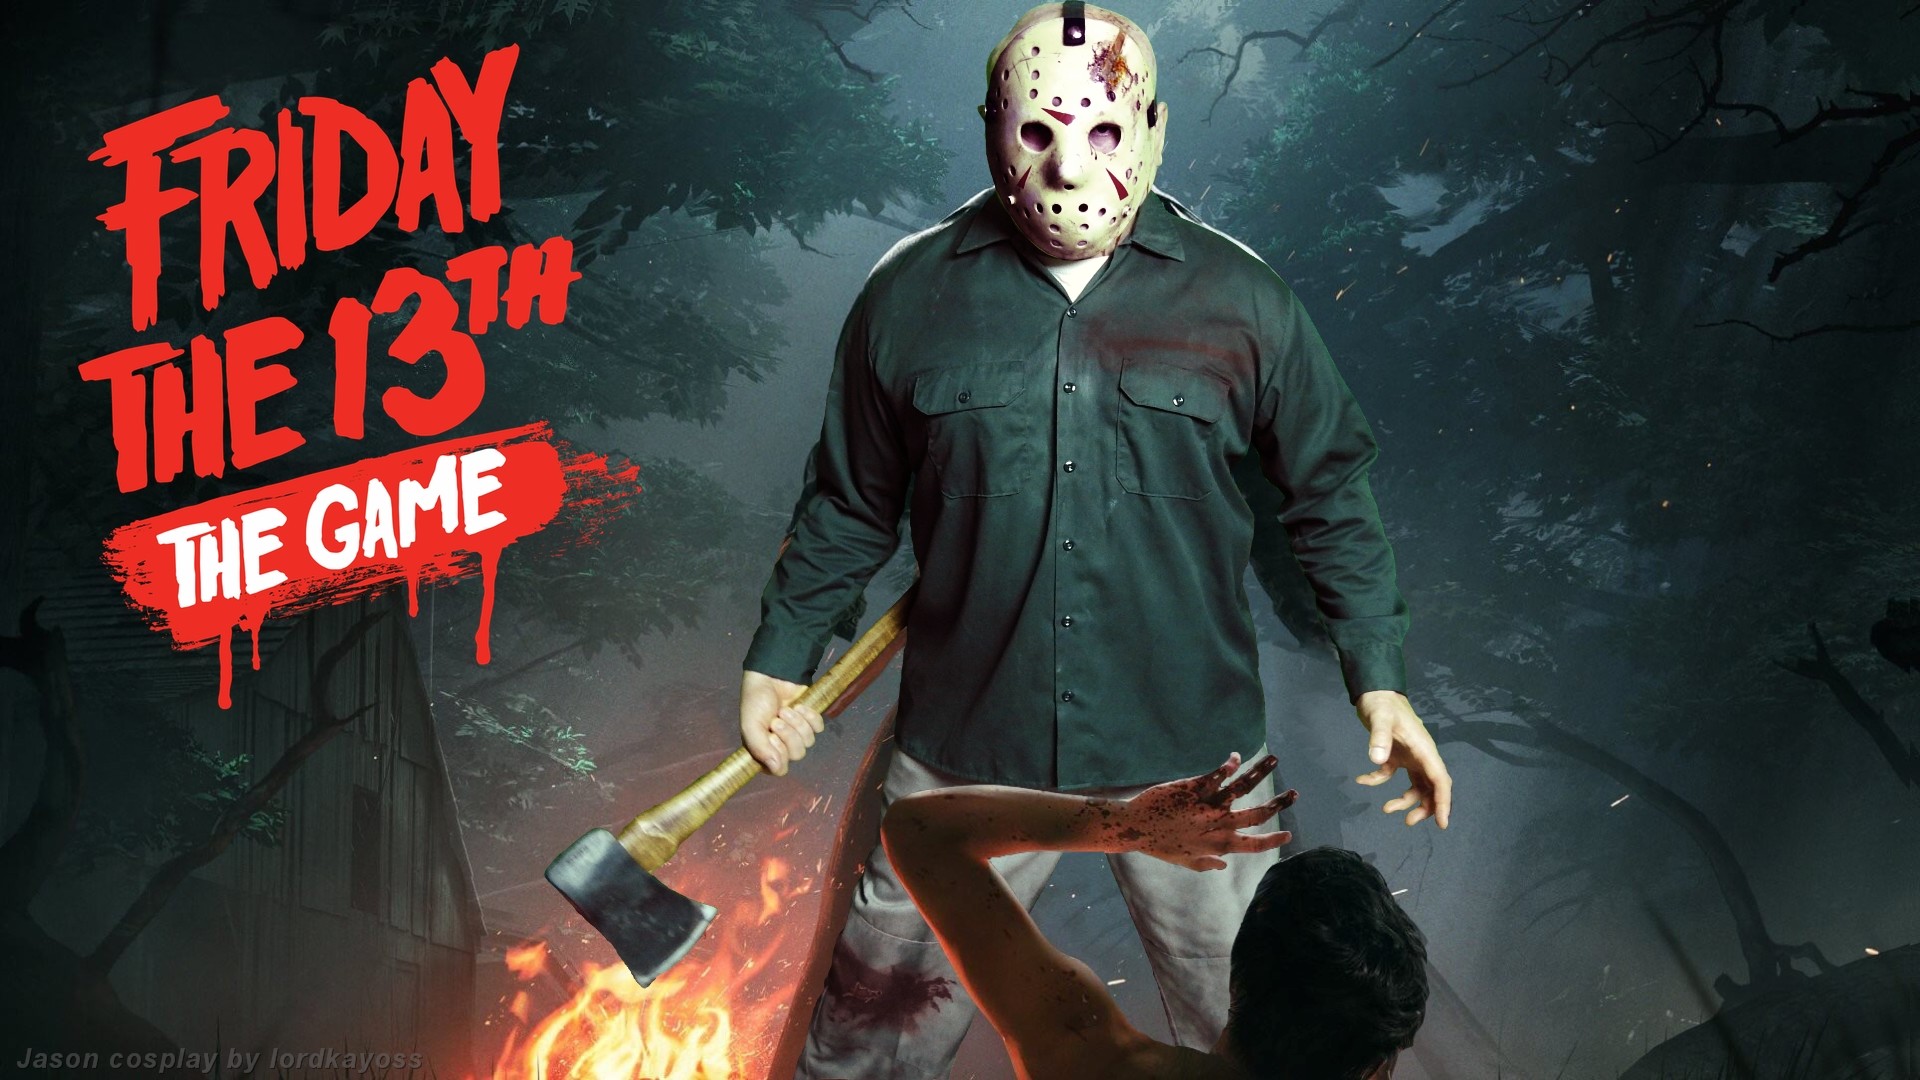 Matched Jason Voorhees main pose with my Jason IV costume and shopped it into the scene for laughs